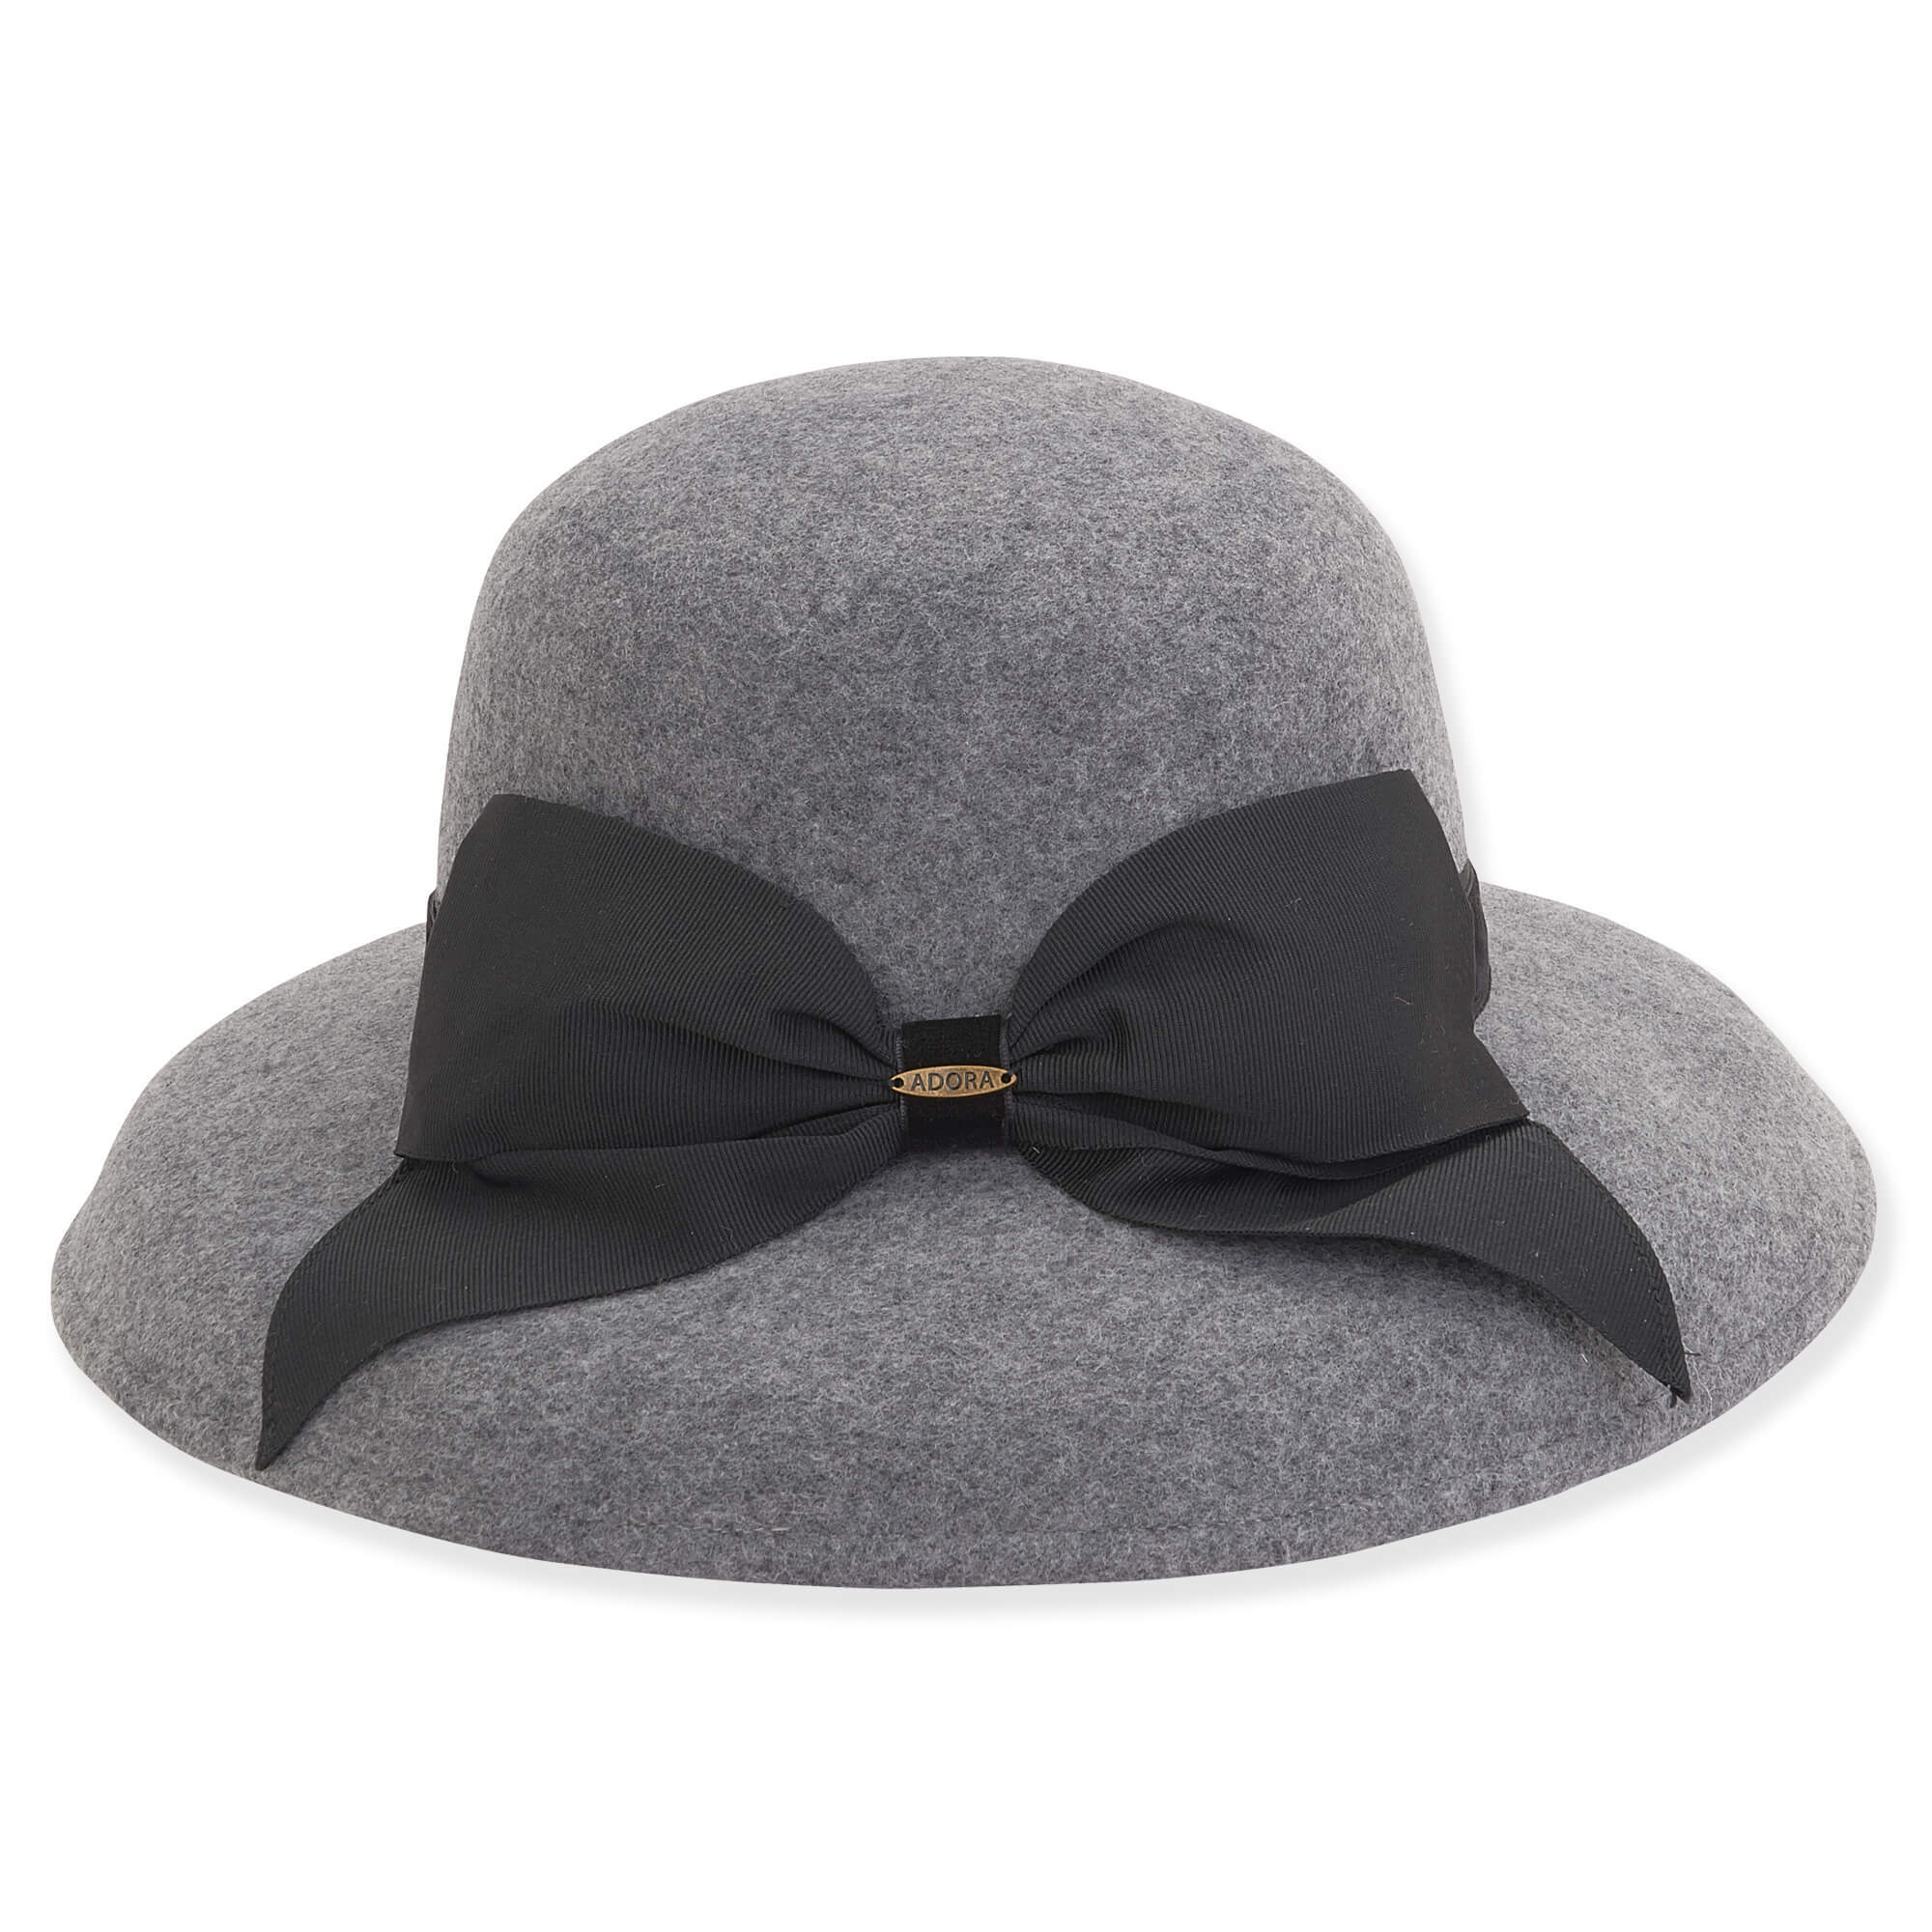 Tiffany Style Wool Felt Hat with Large Bow - Adora® Hats Cloche Adora Hats    